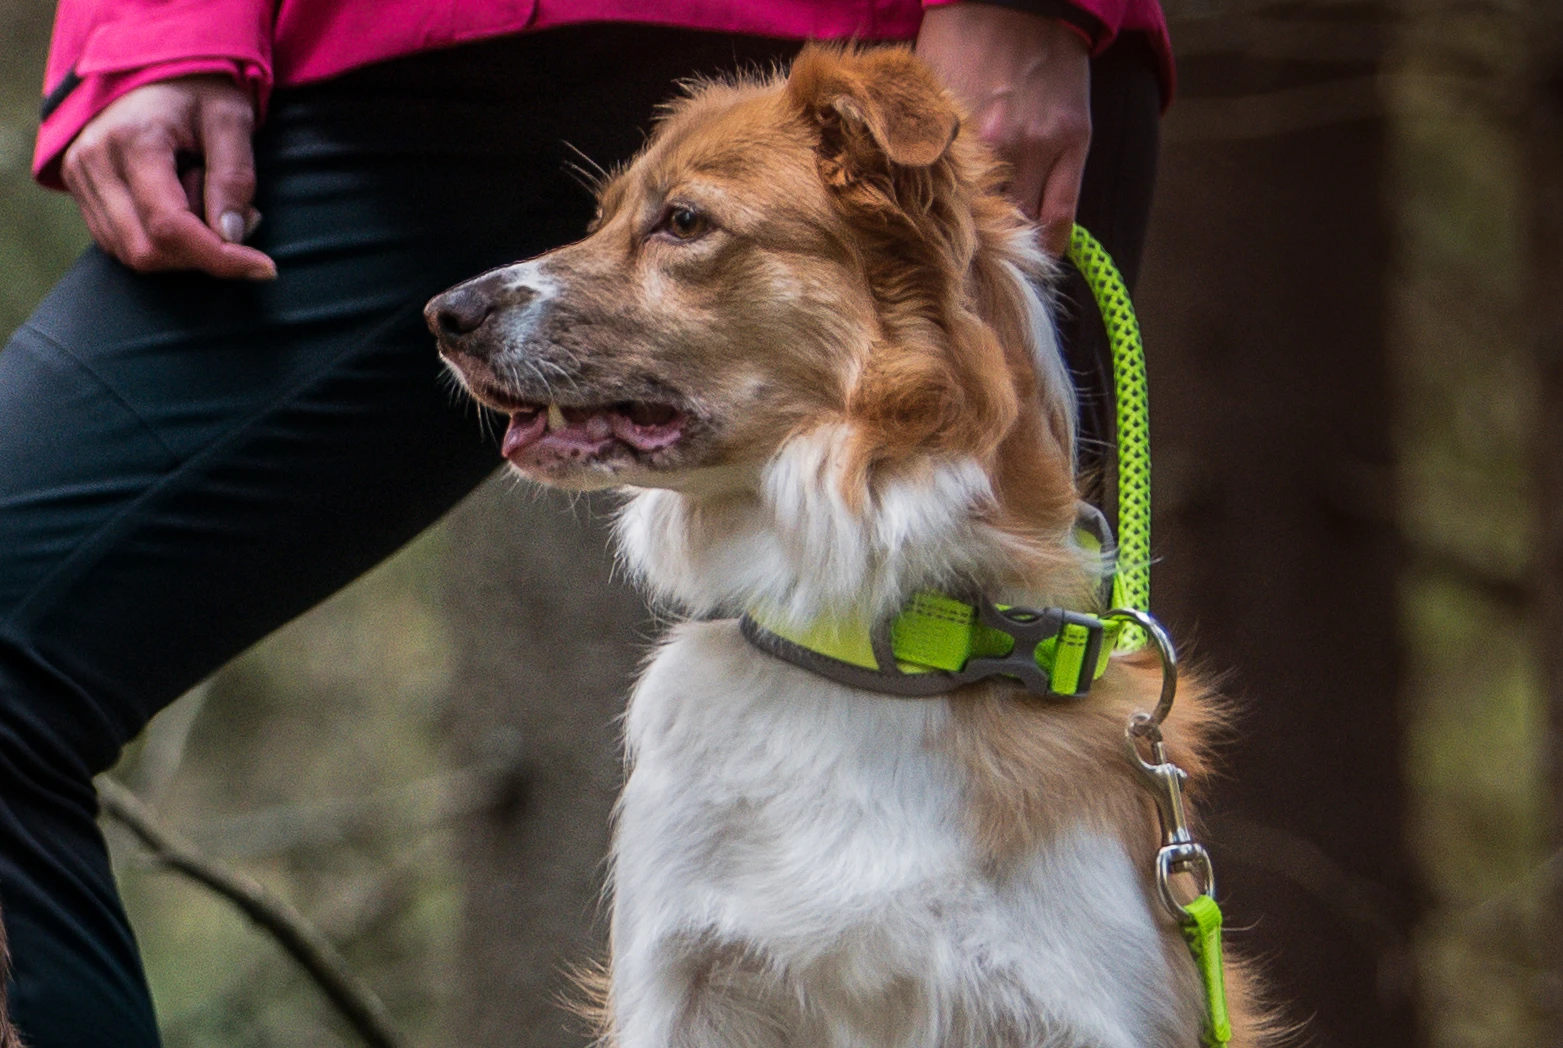 A dog with a neon yellow Icepeak Pet leash